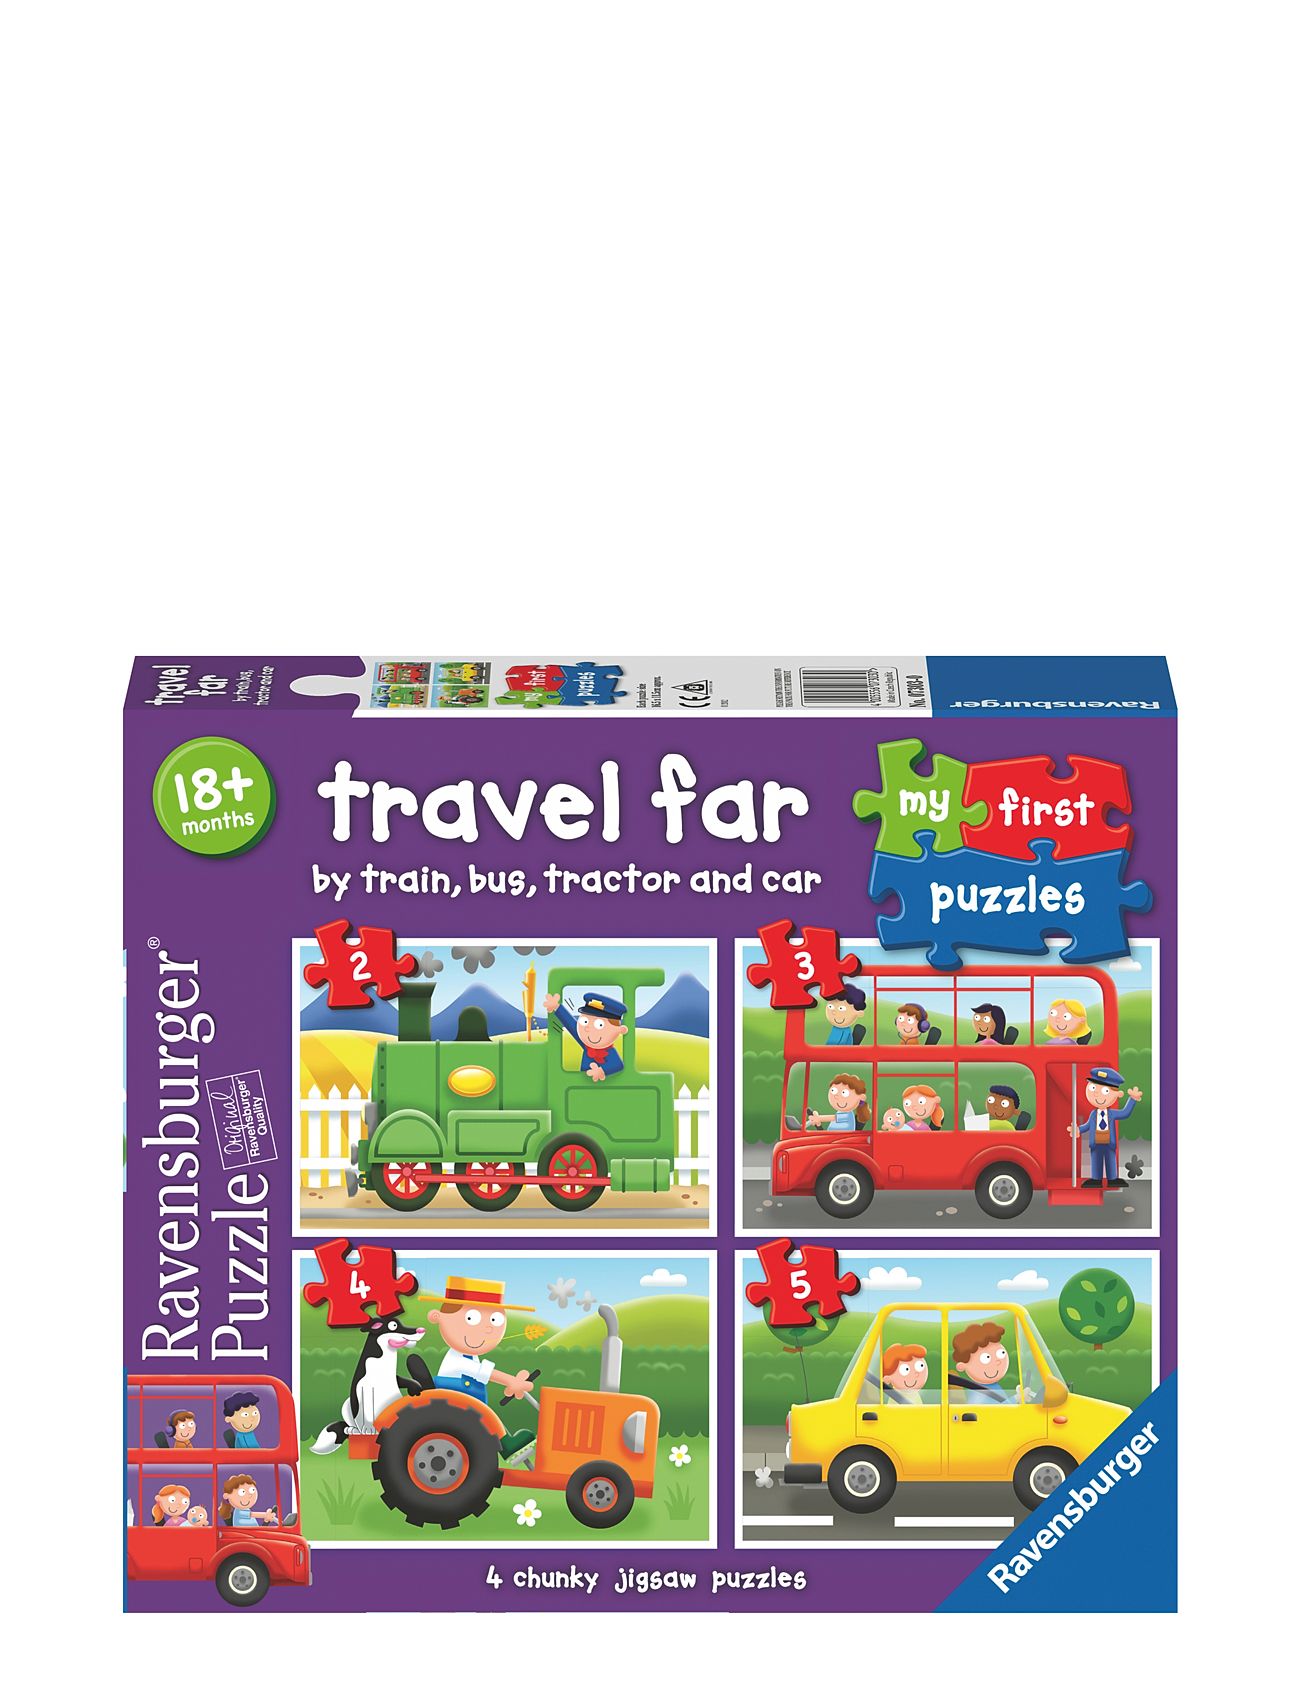 Travel Far My First Puzzle 2/3/4/5P Toys Puzzles And Games Puzzles Classic Puzzles Multi/patterned Ravensburger